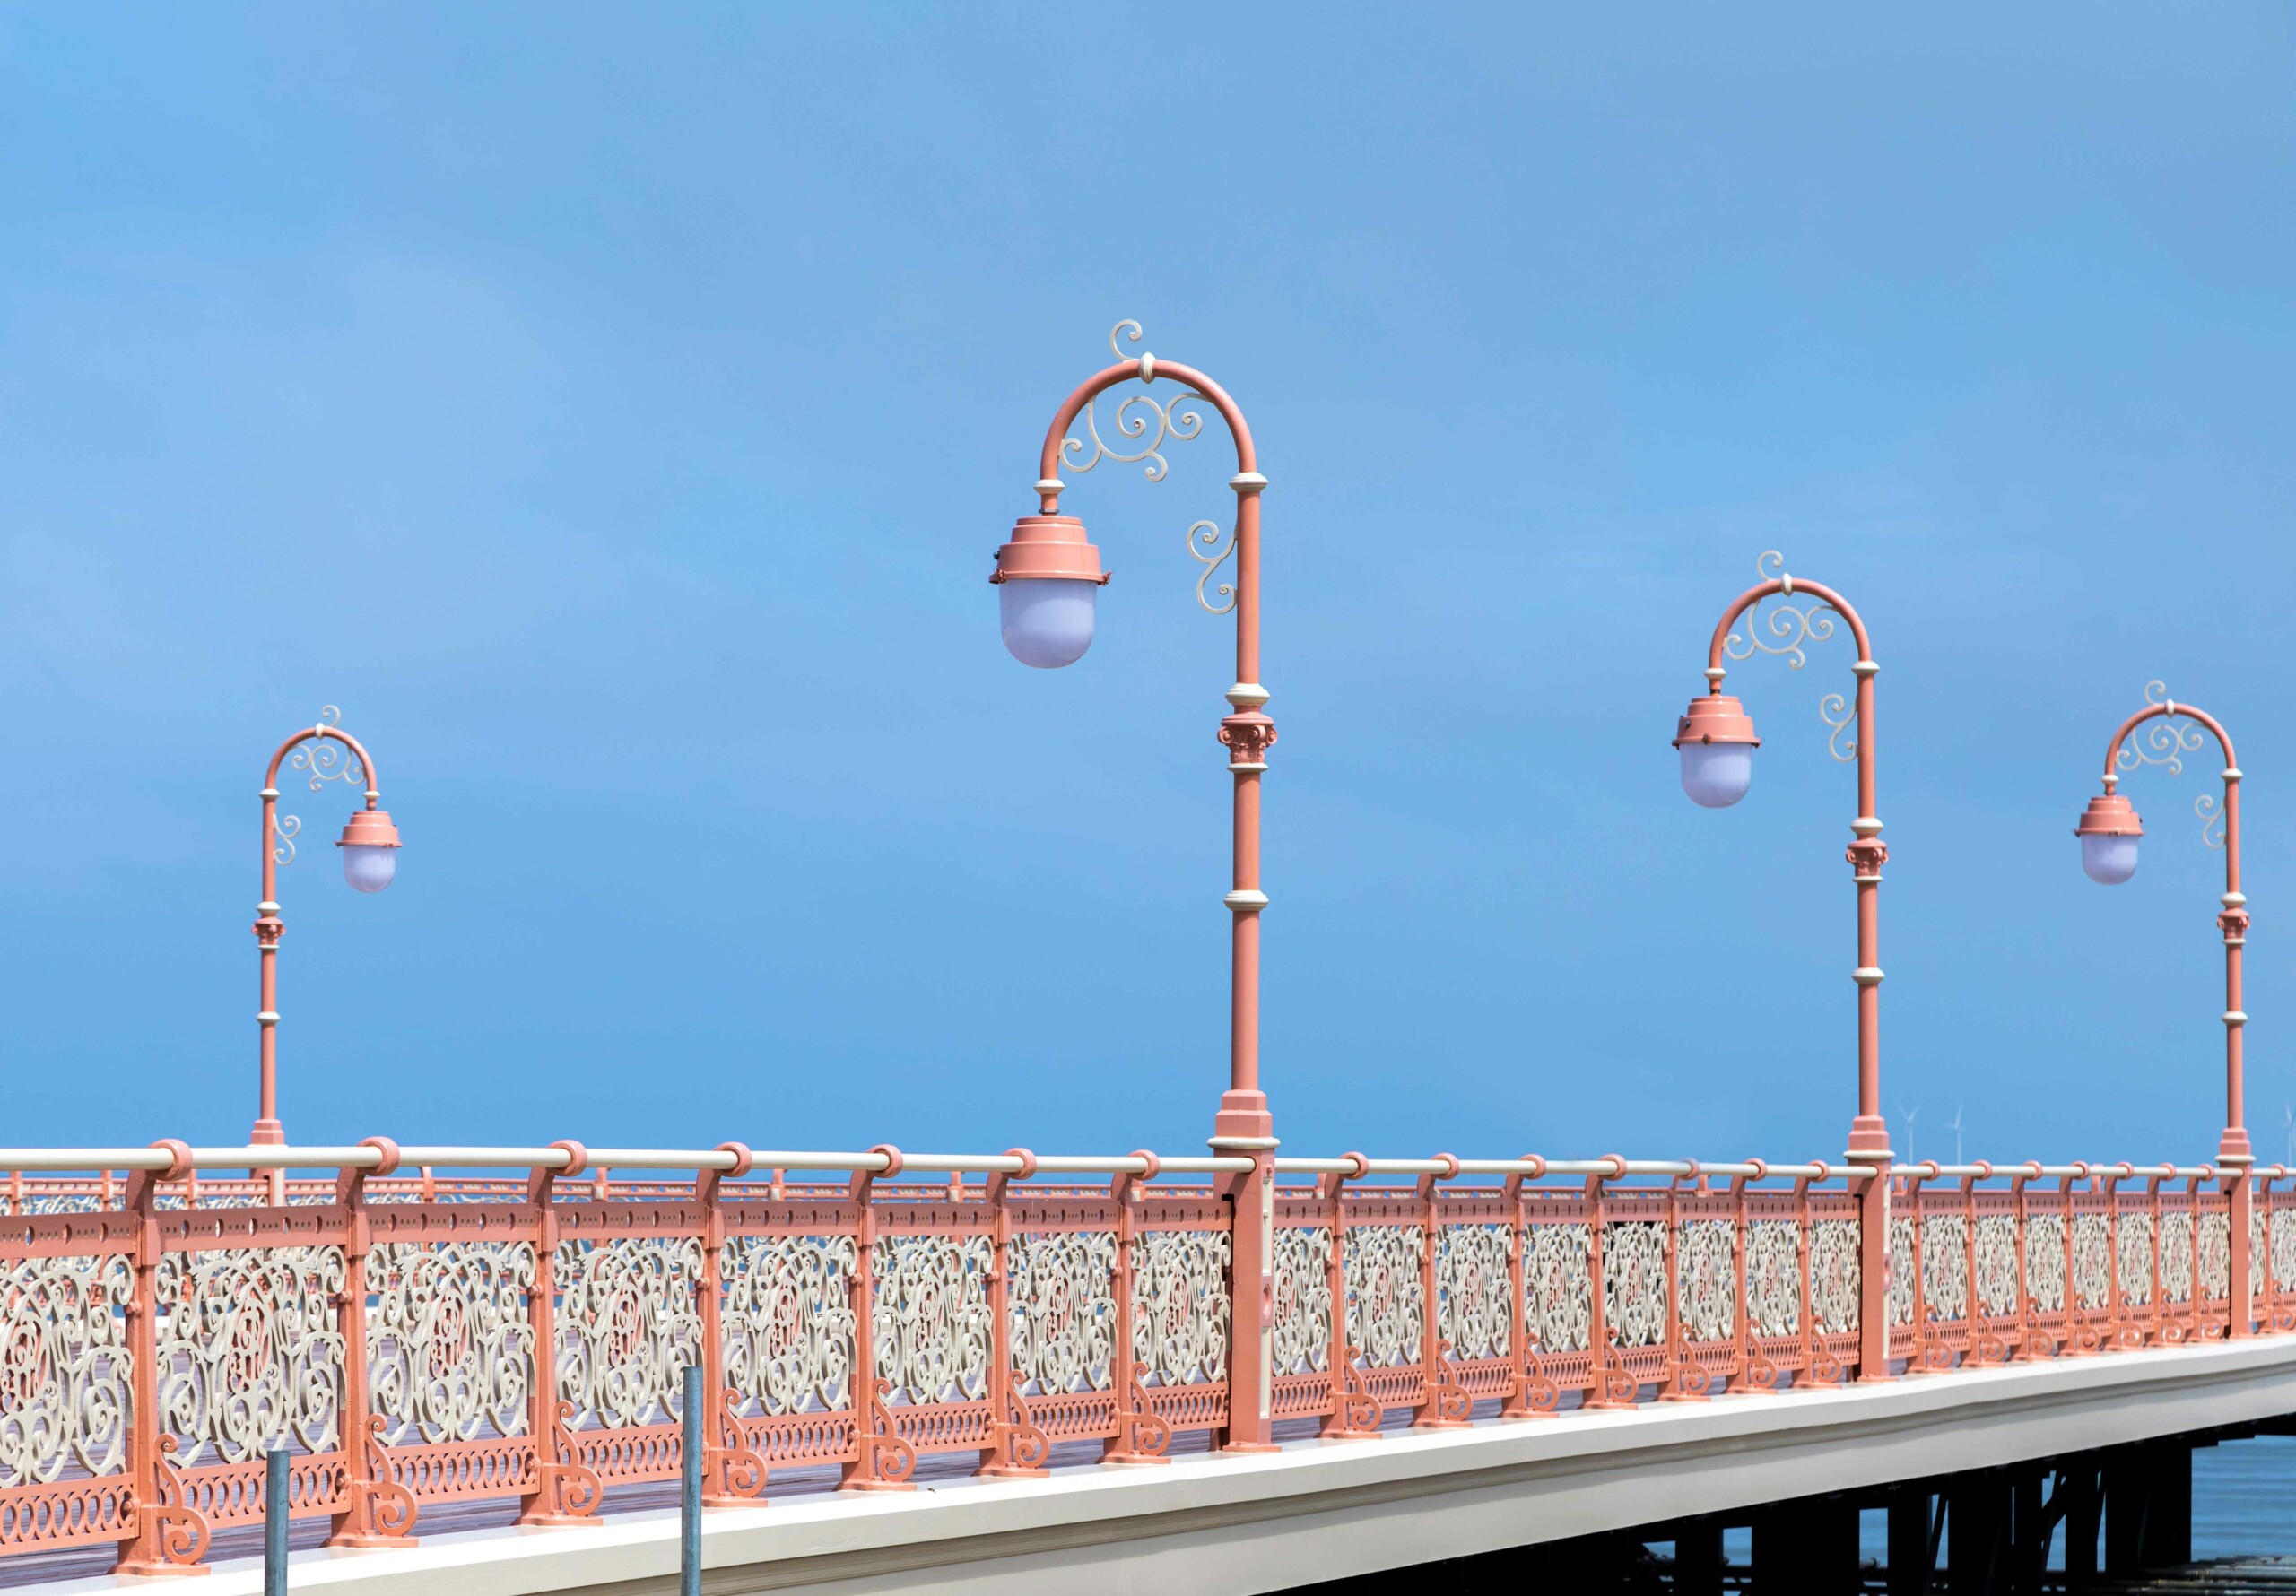 Colwyn Bay's decorative cast-ironwork and lighting